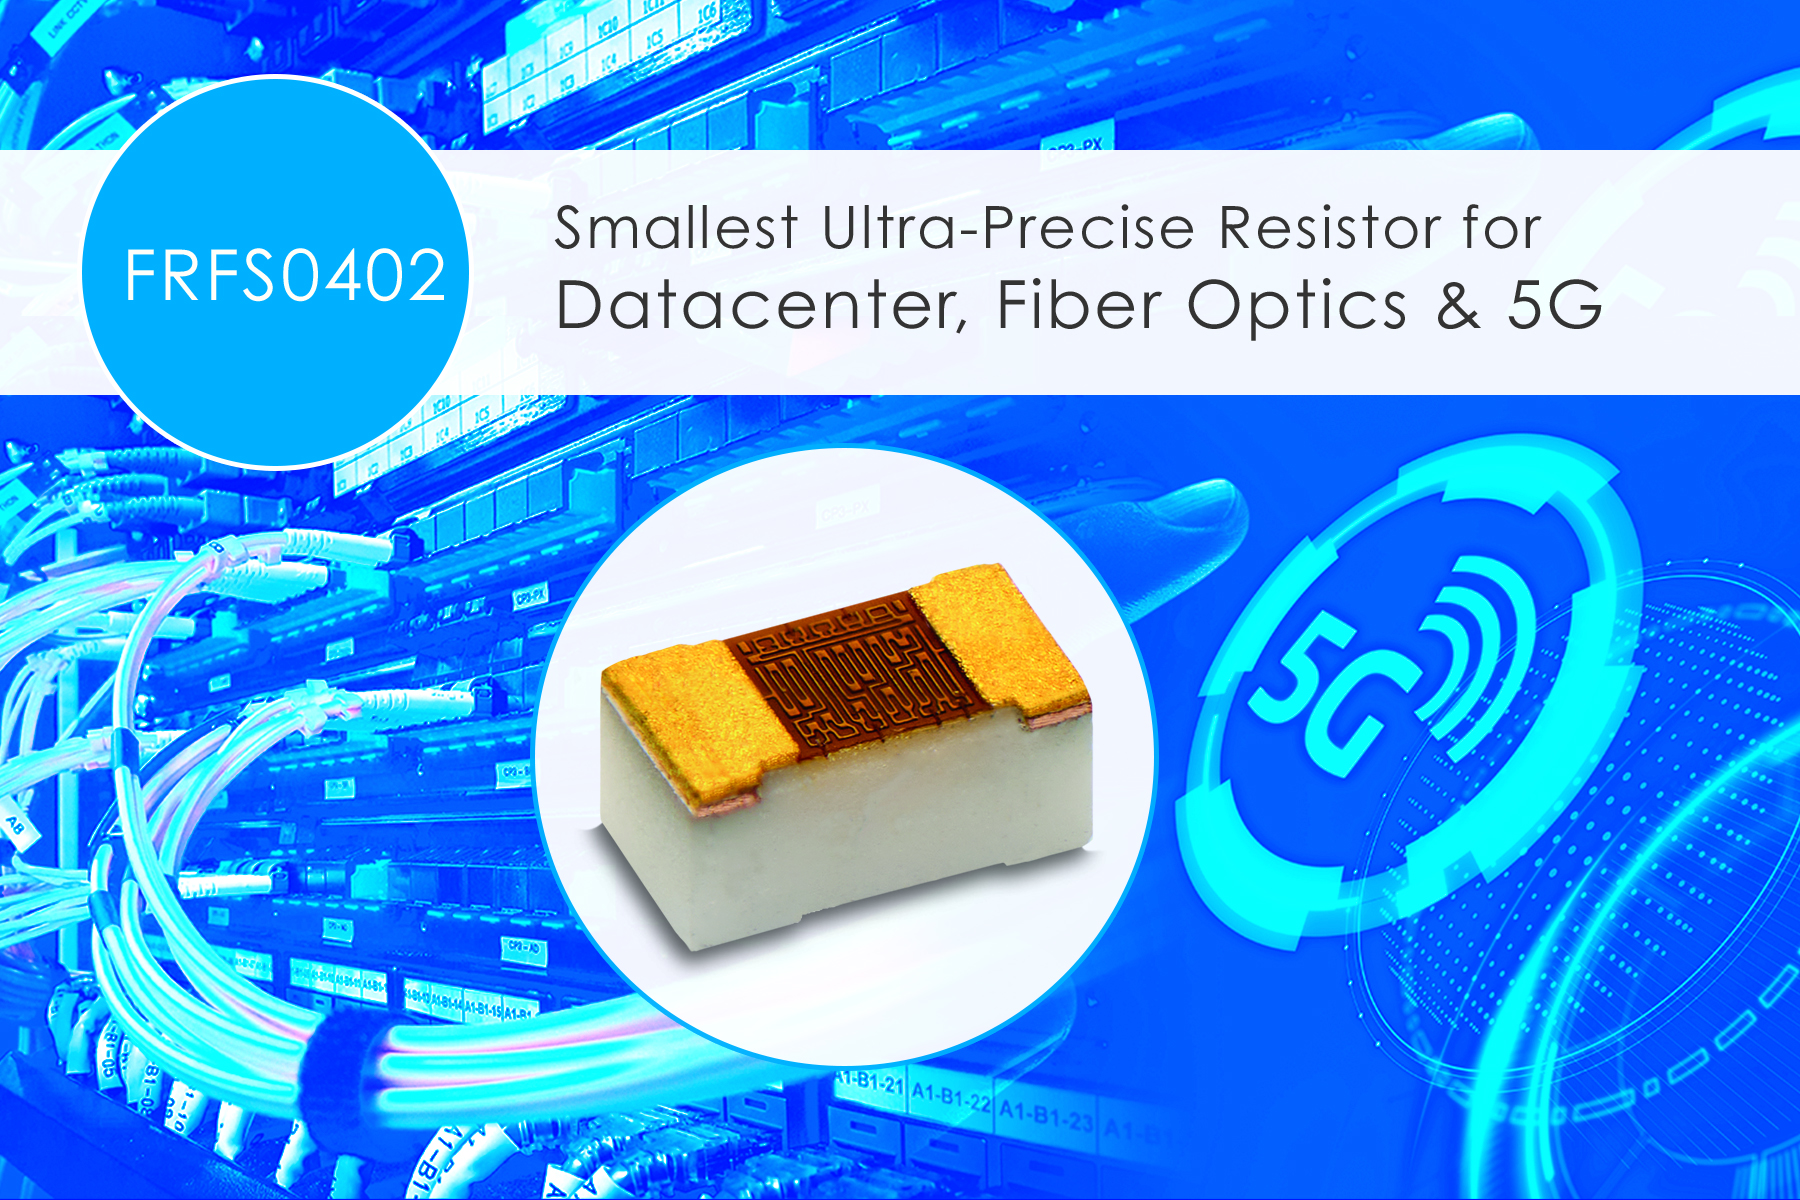 High-Precision Resistor with First-of-its-Kind Construction